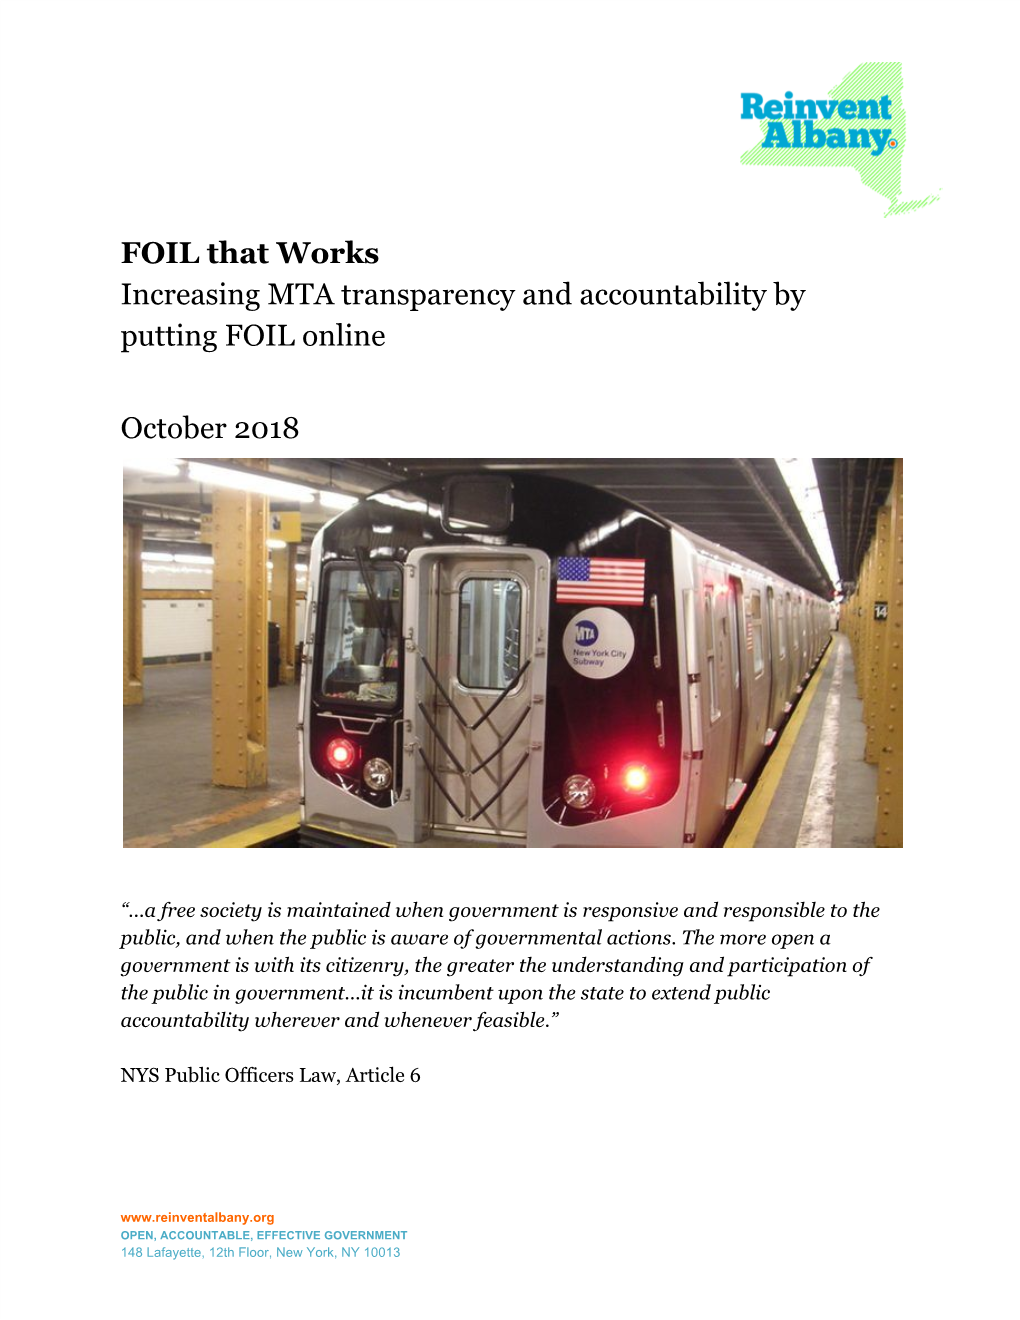 Increasing MTA Transparency and Accountability by Putting FOIL Online